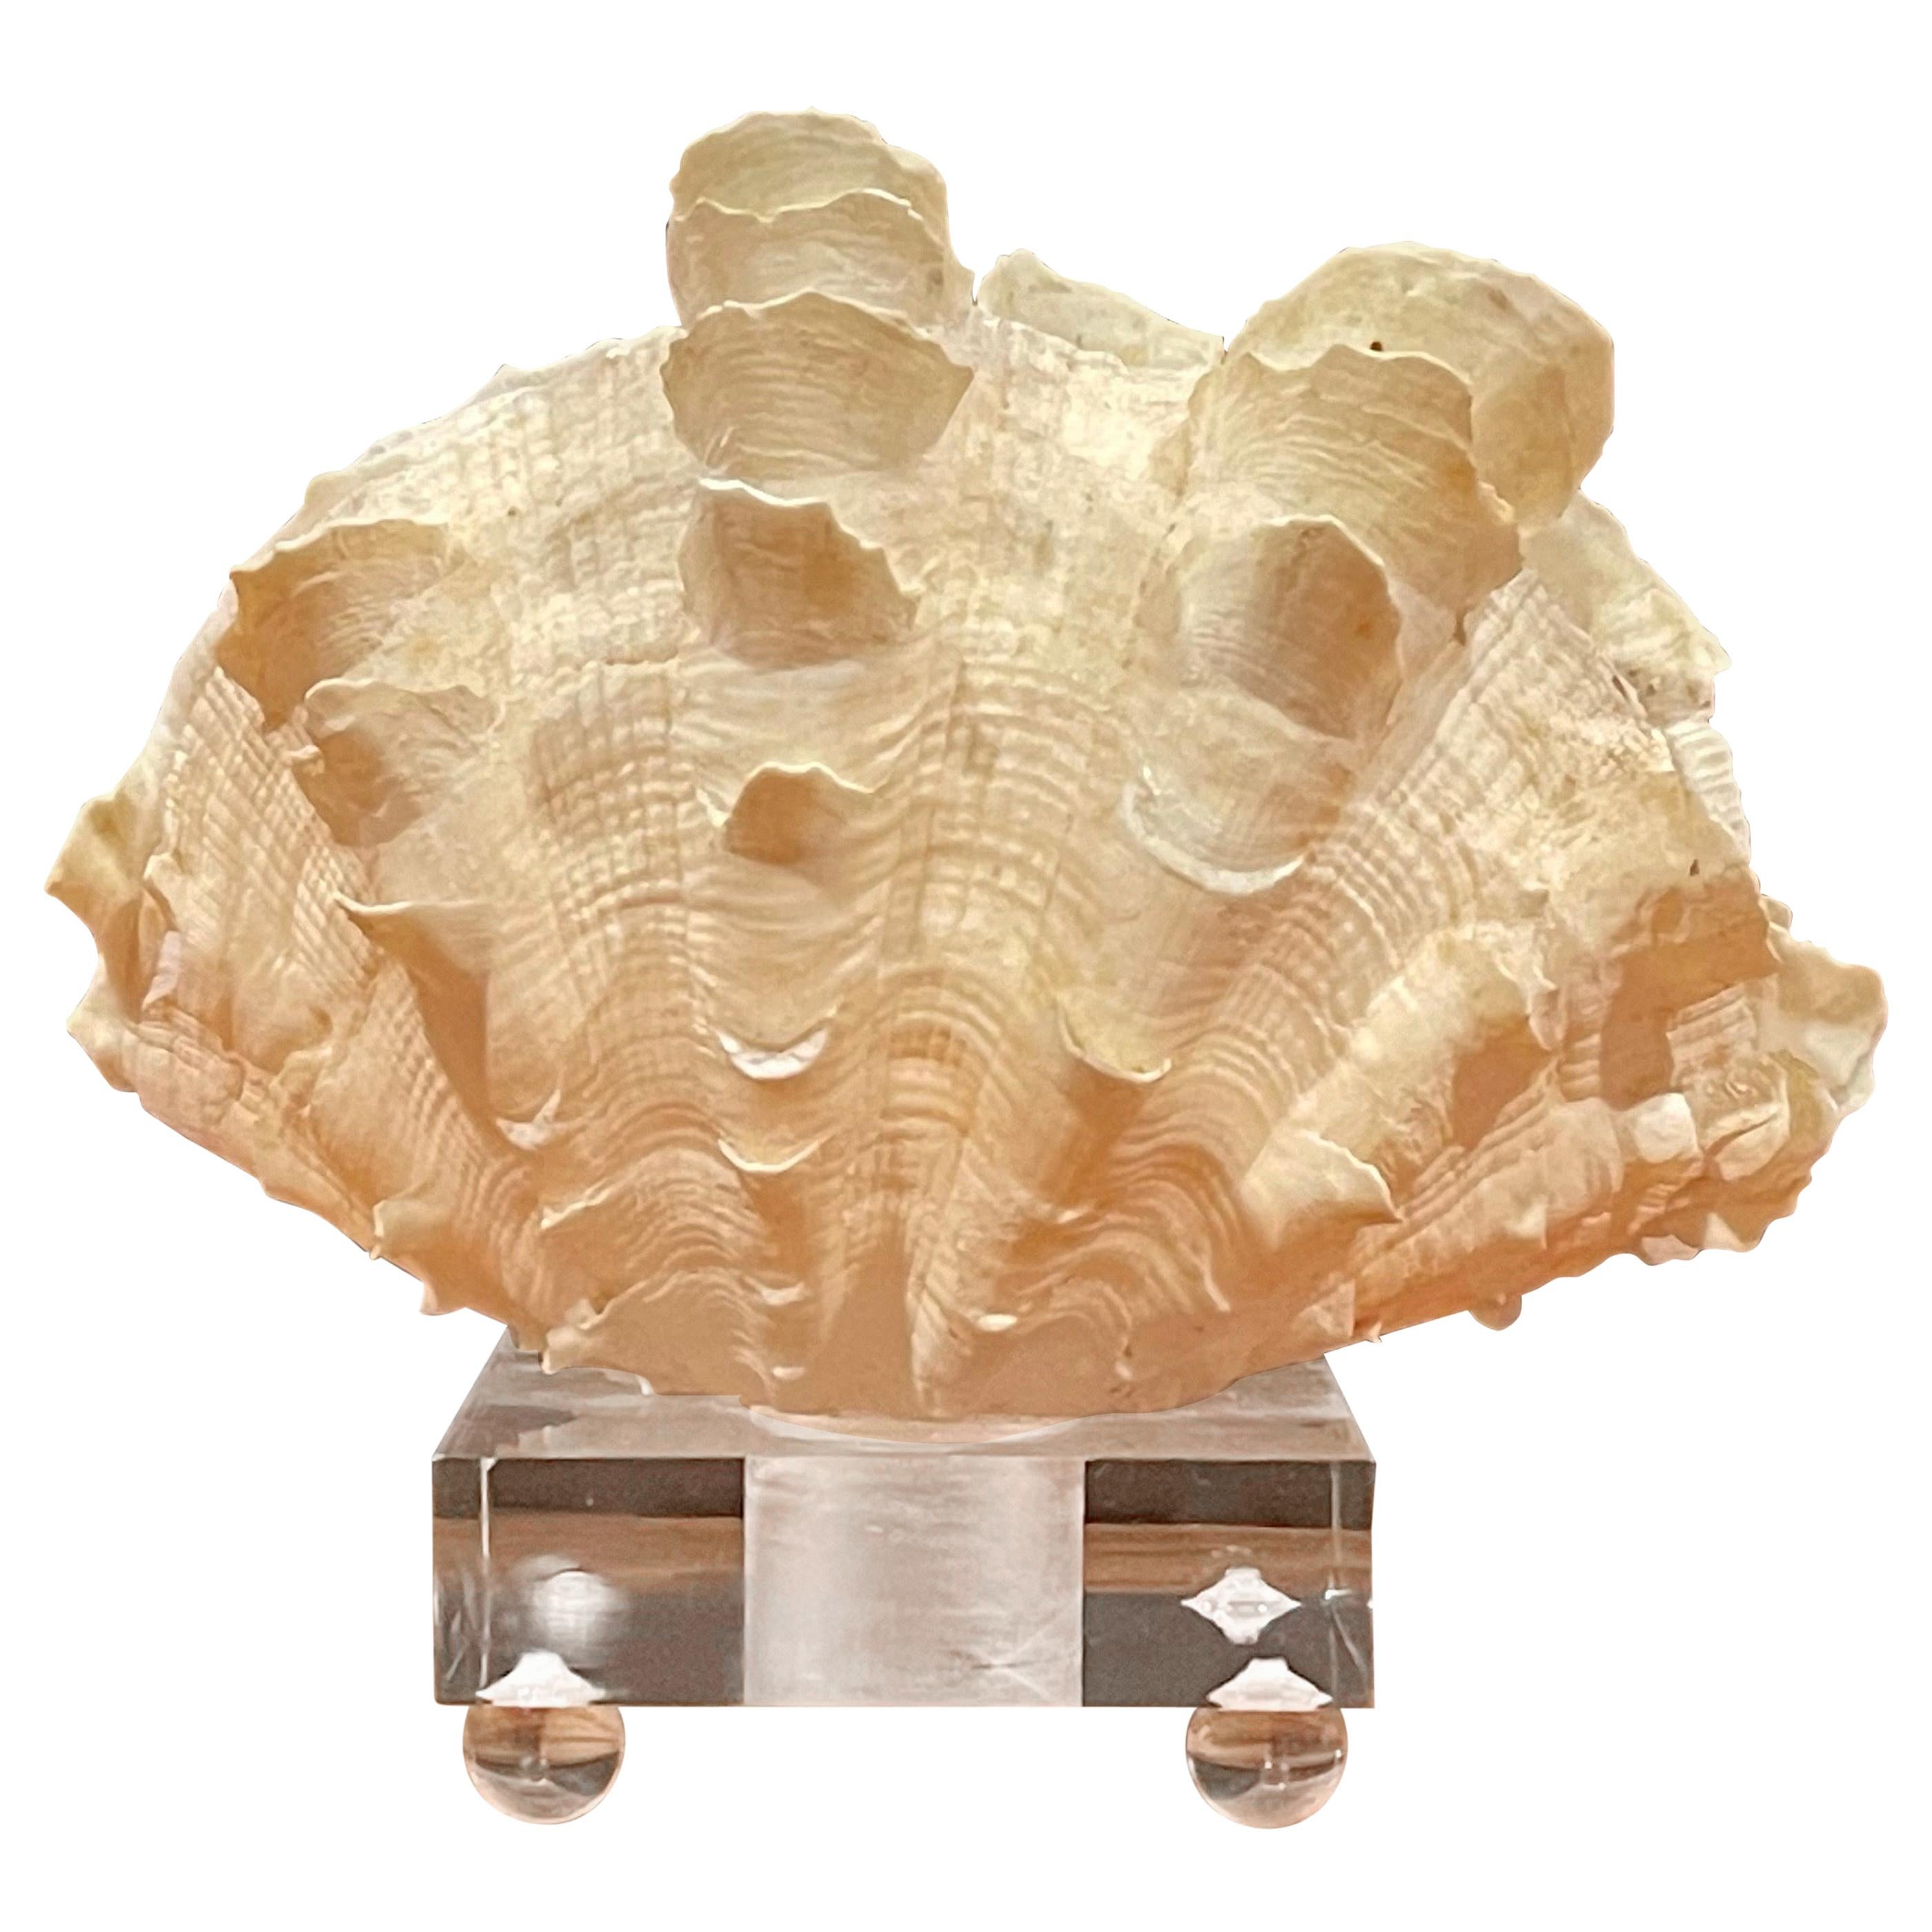 Organic Sculptural Clam Shell on Lucite Base